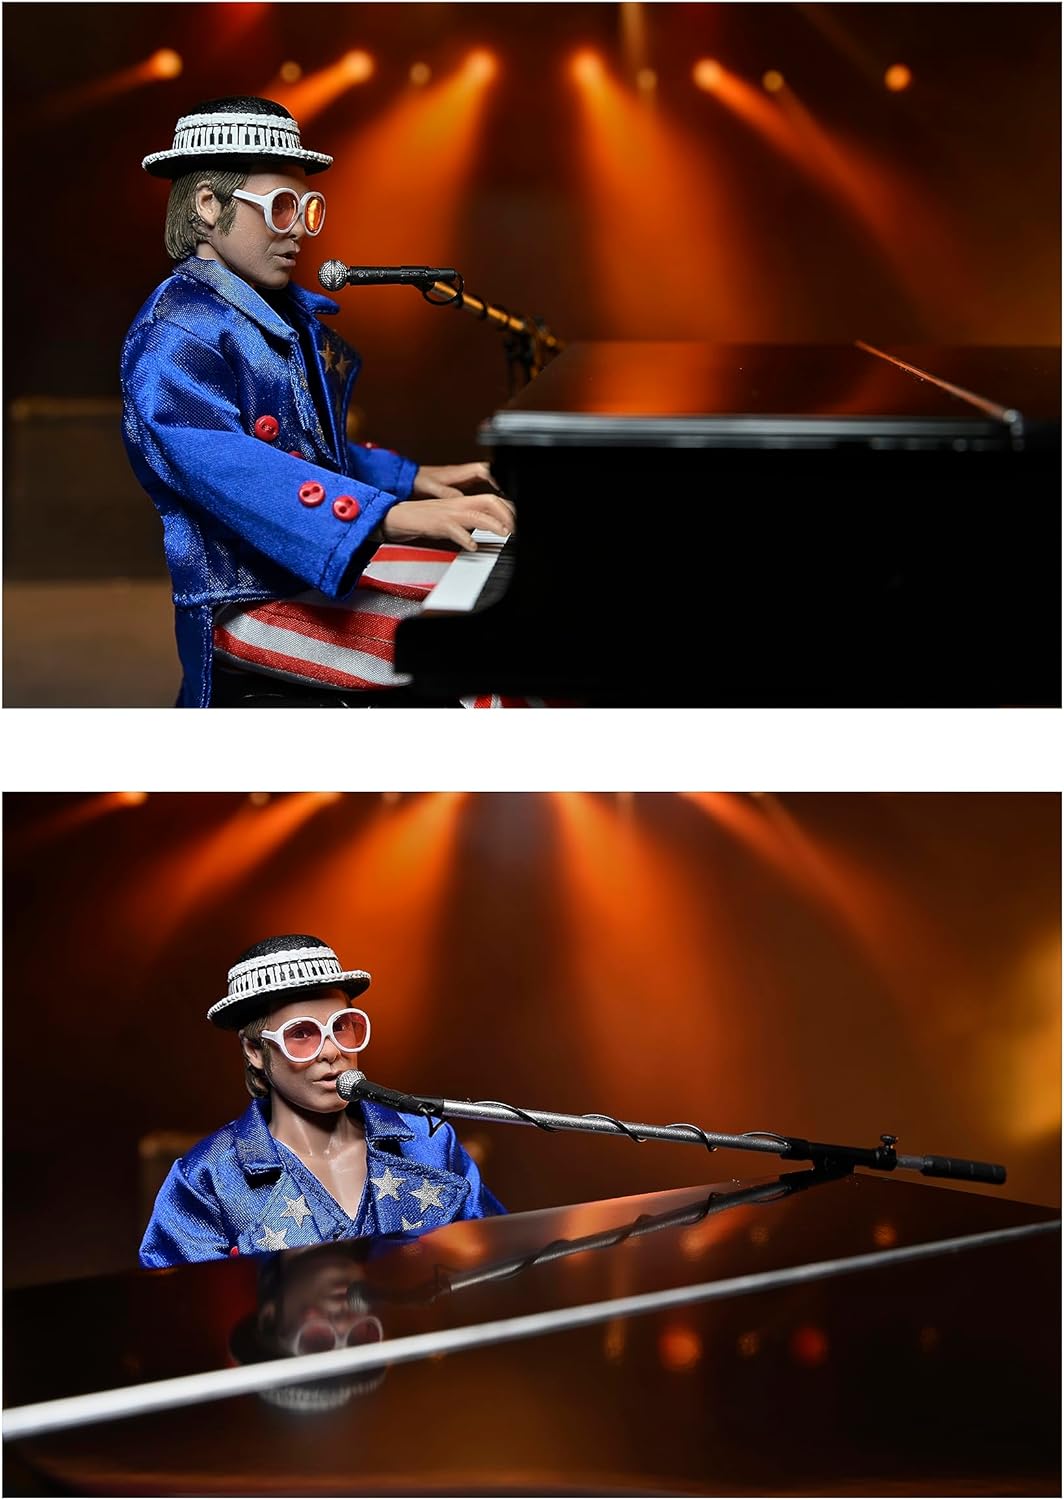 NECA Elton John With Piano (Live 1976) Deluxe 8” Clothed Action Figure